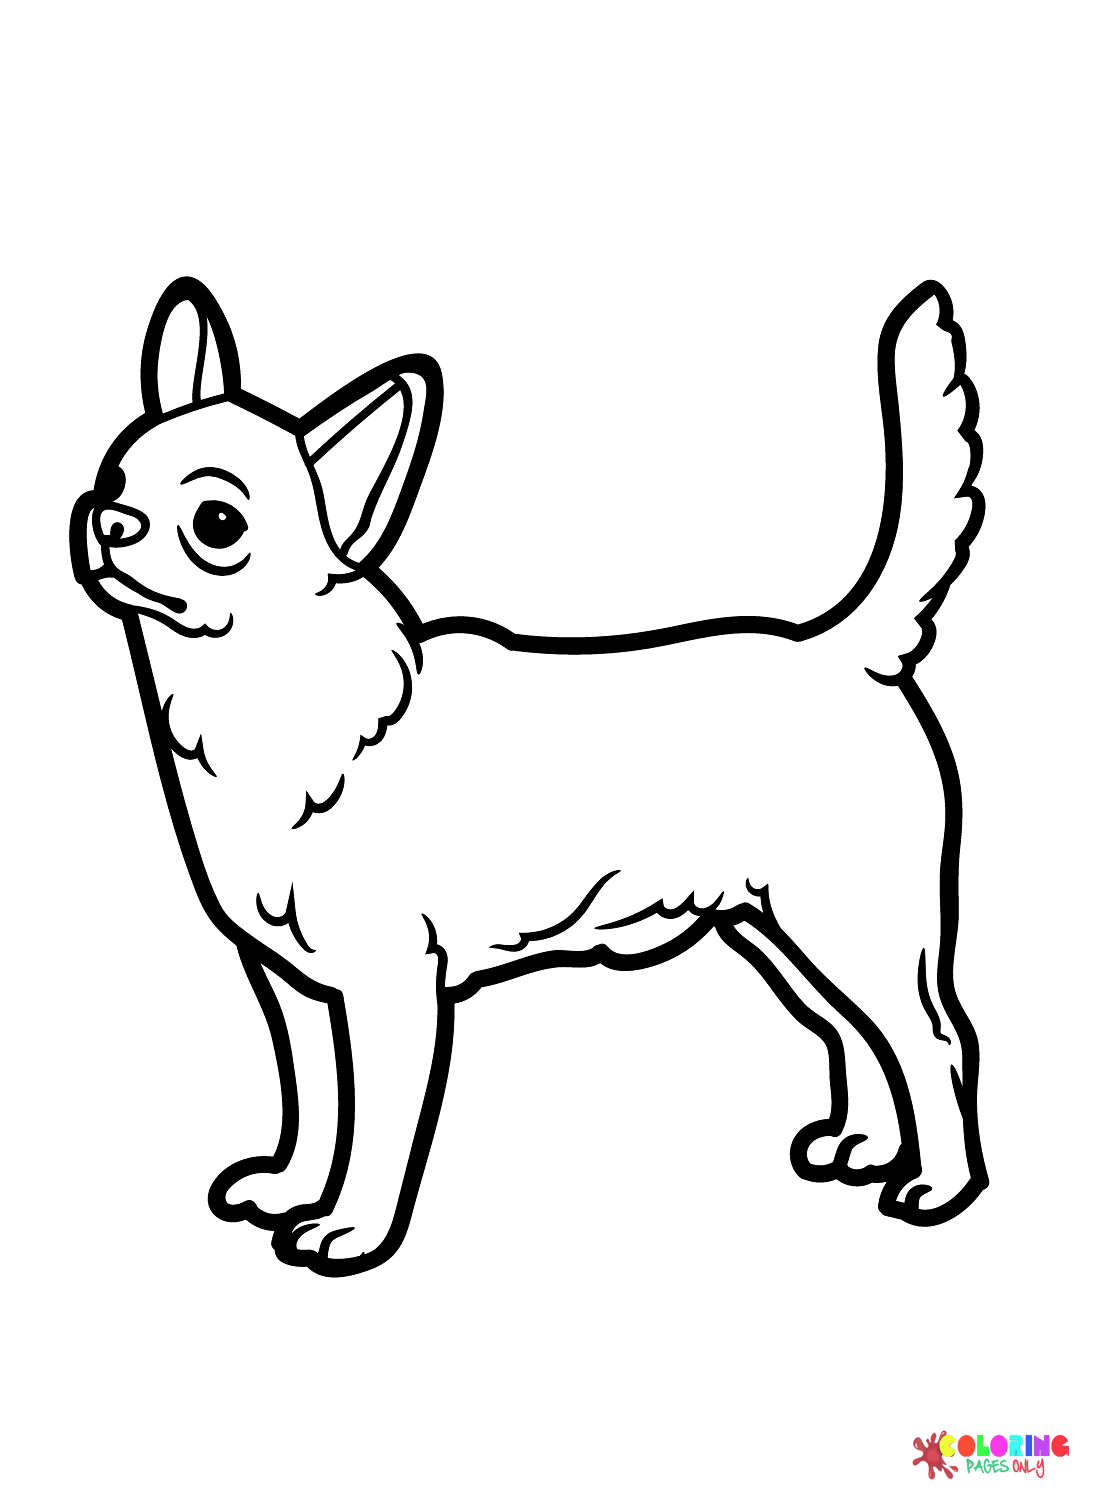 chihuahua-dog-coloring-pages-free-printable-coloring-pages